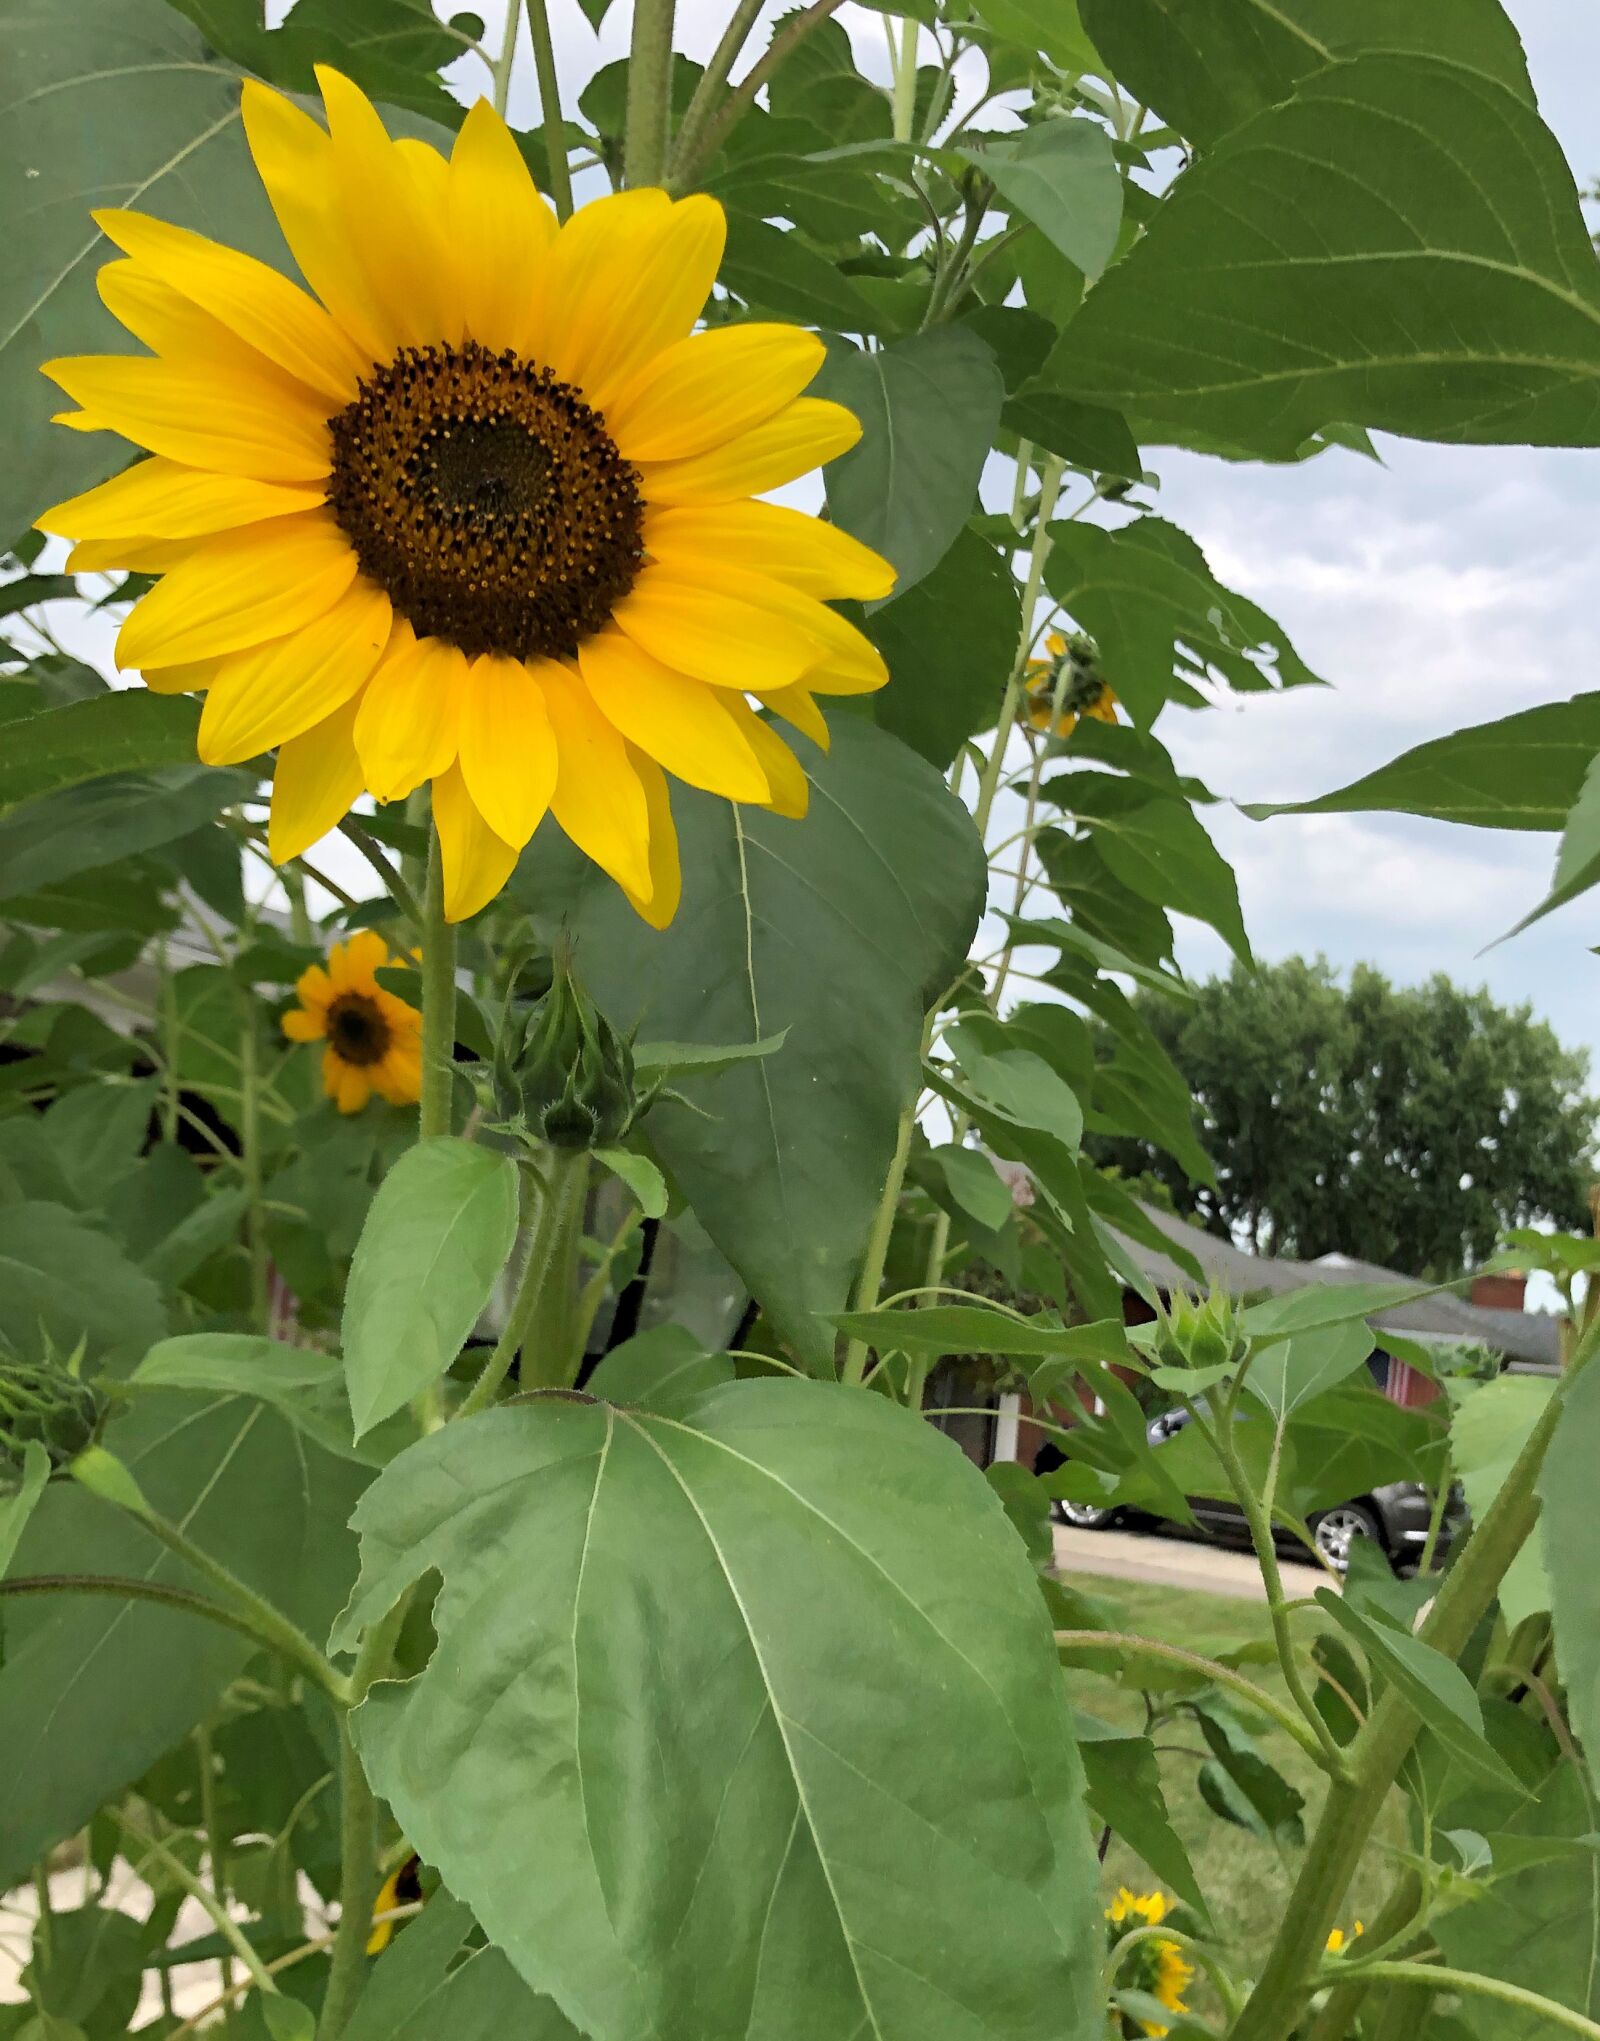 iPhone 8 back camera 3.99mm f/1.8 sample photo. Sunflower, summer, happy photography